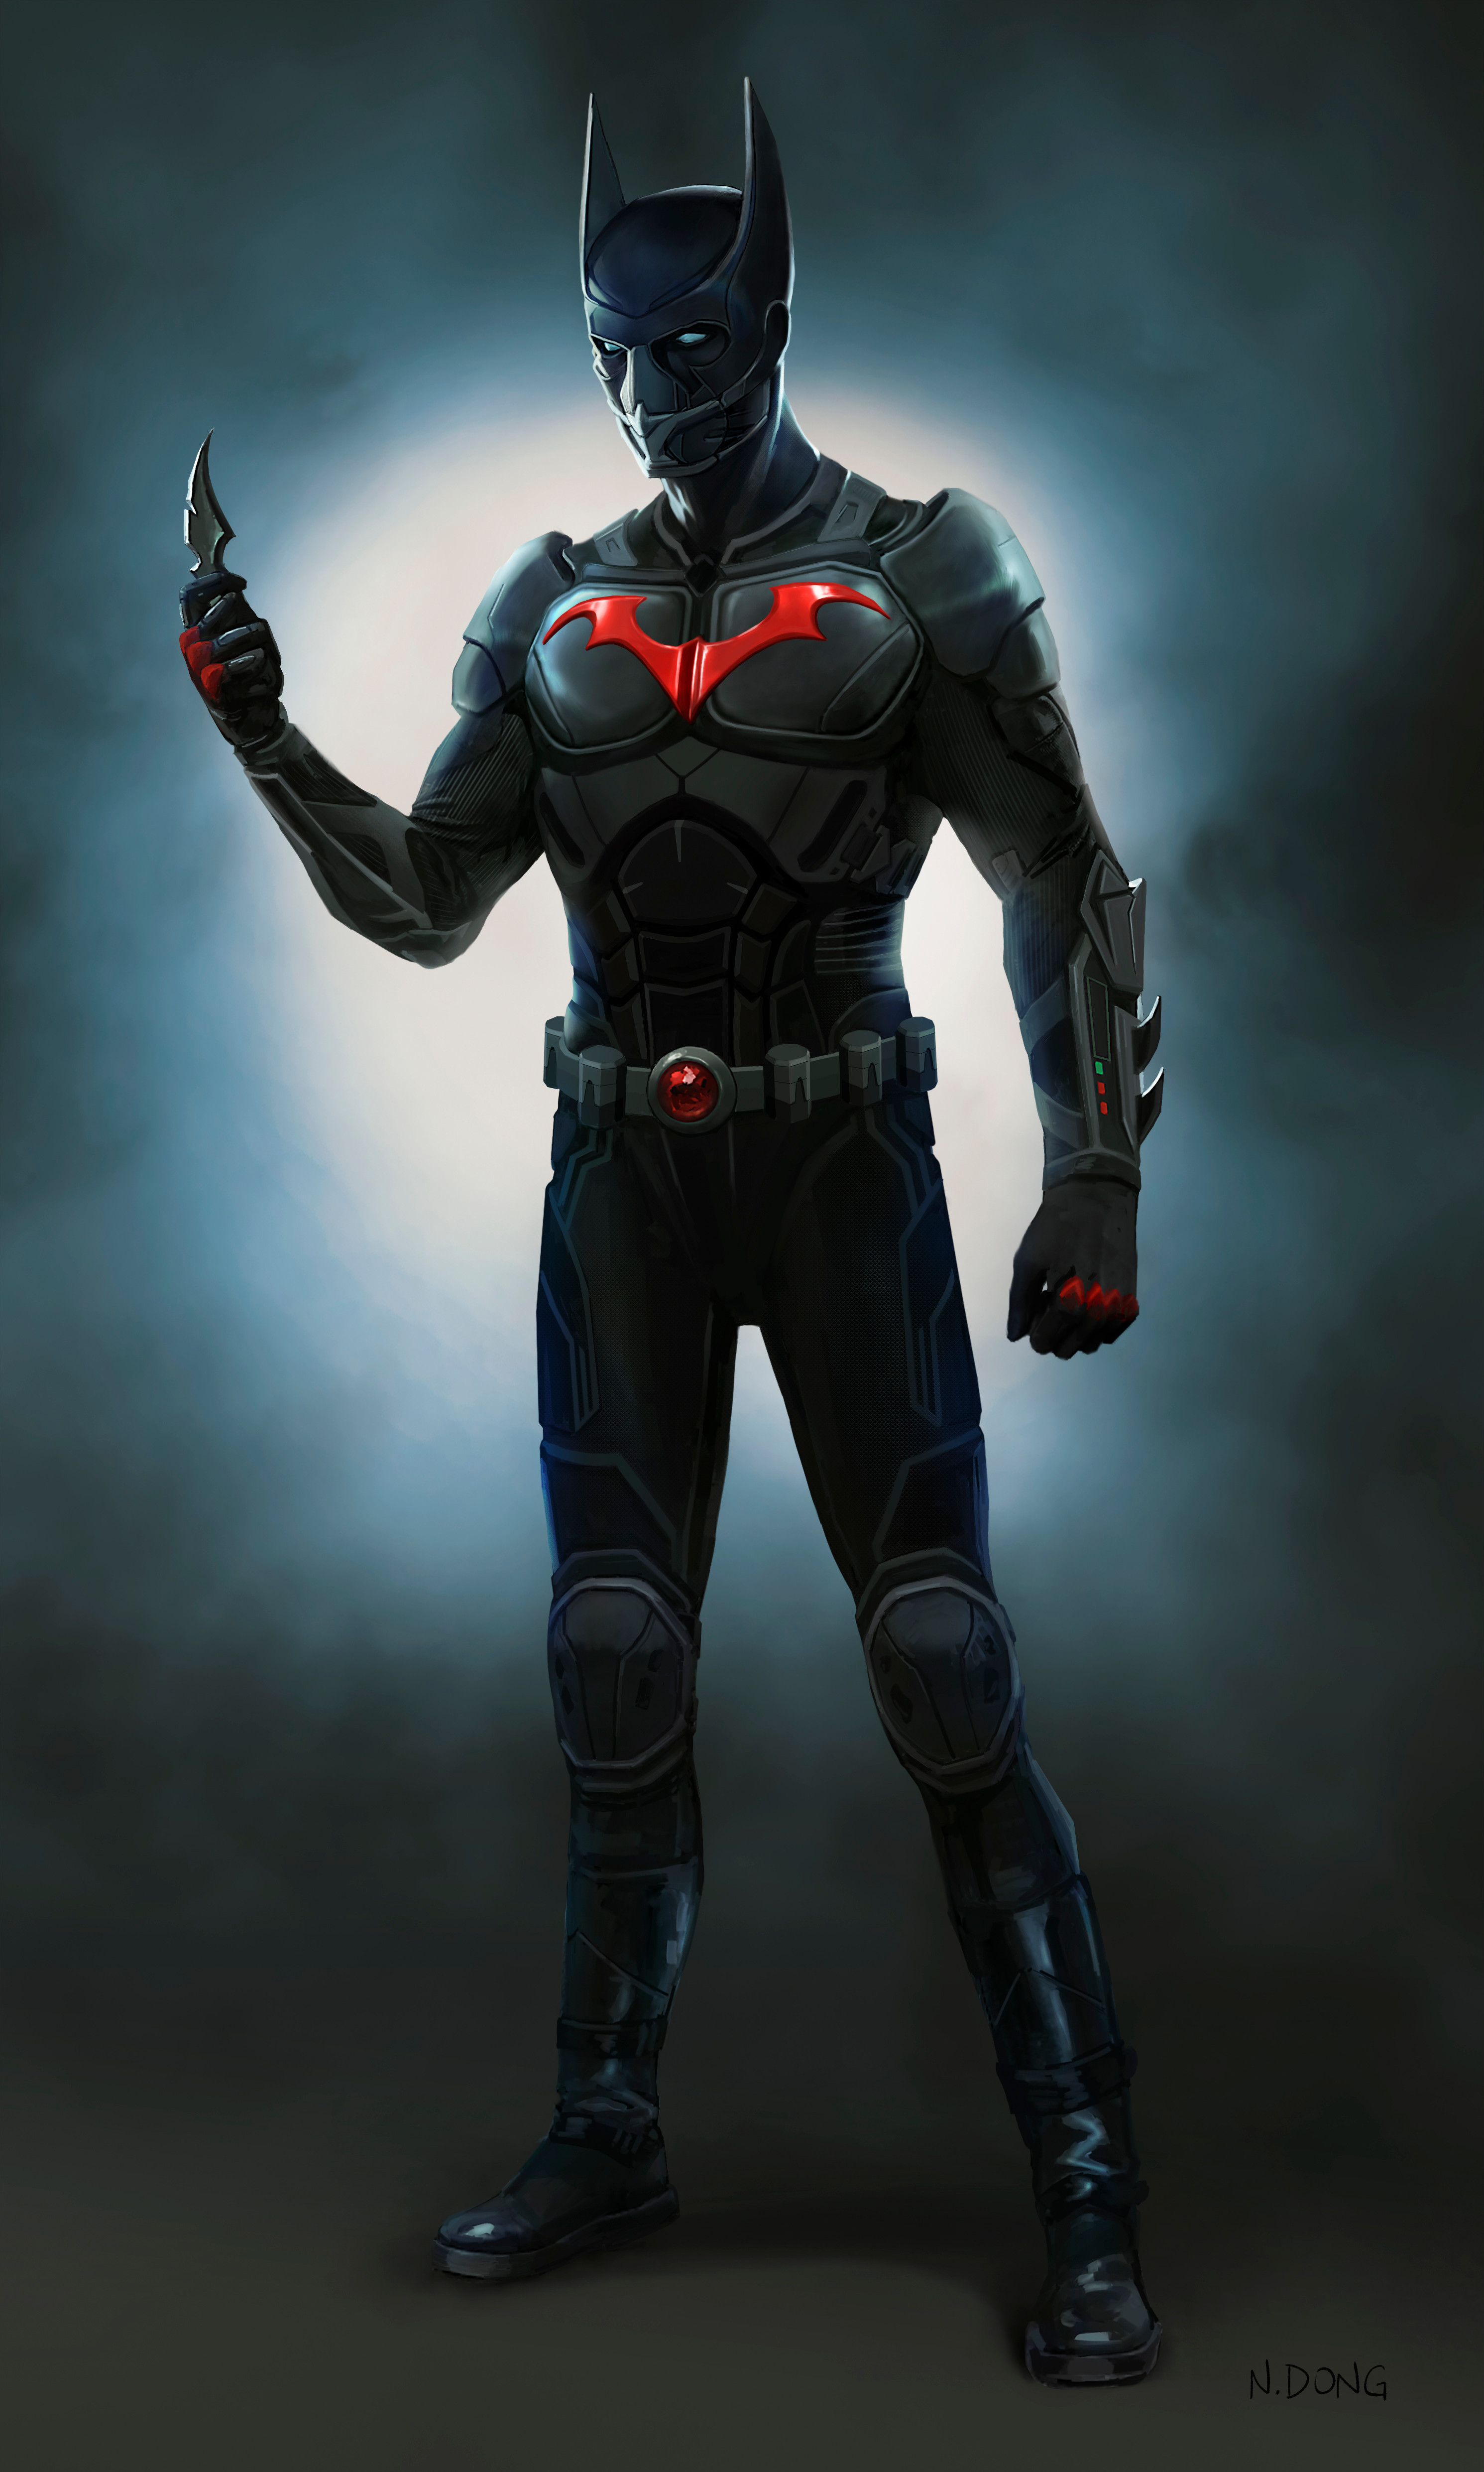 Batman Beyond character design for live action motion pictures.